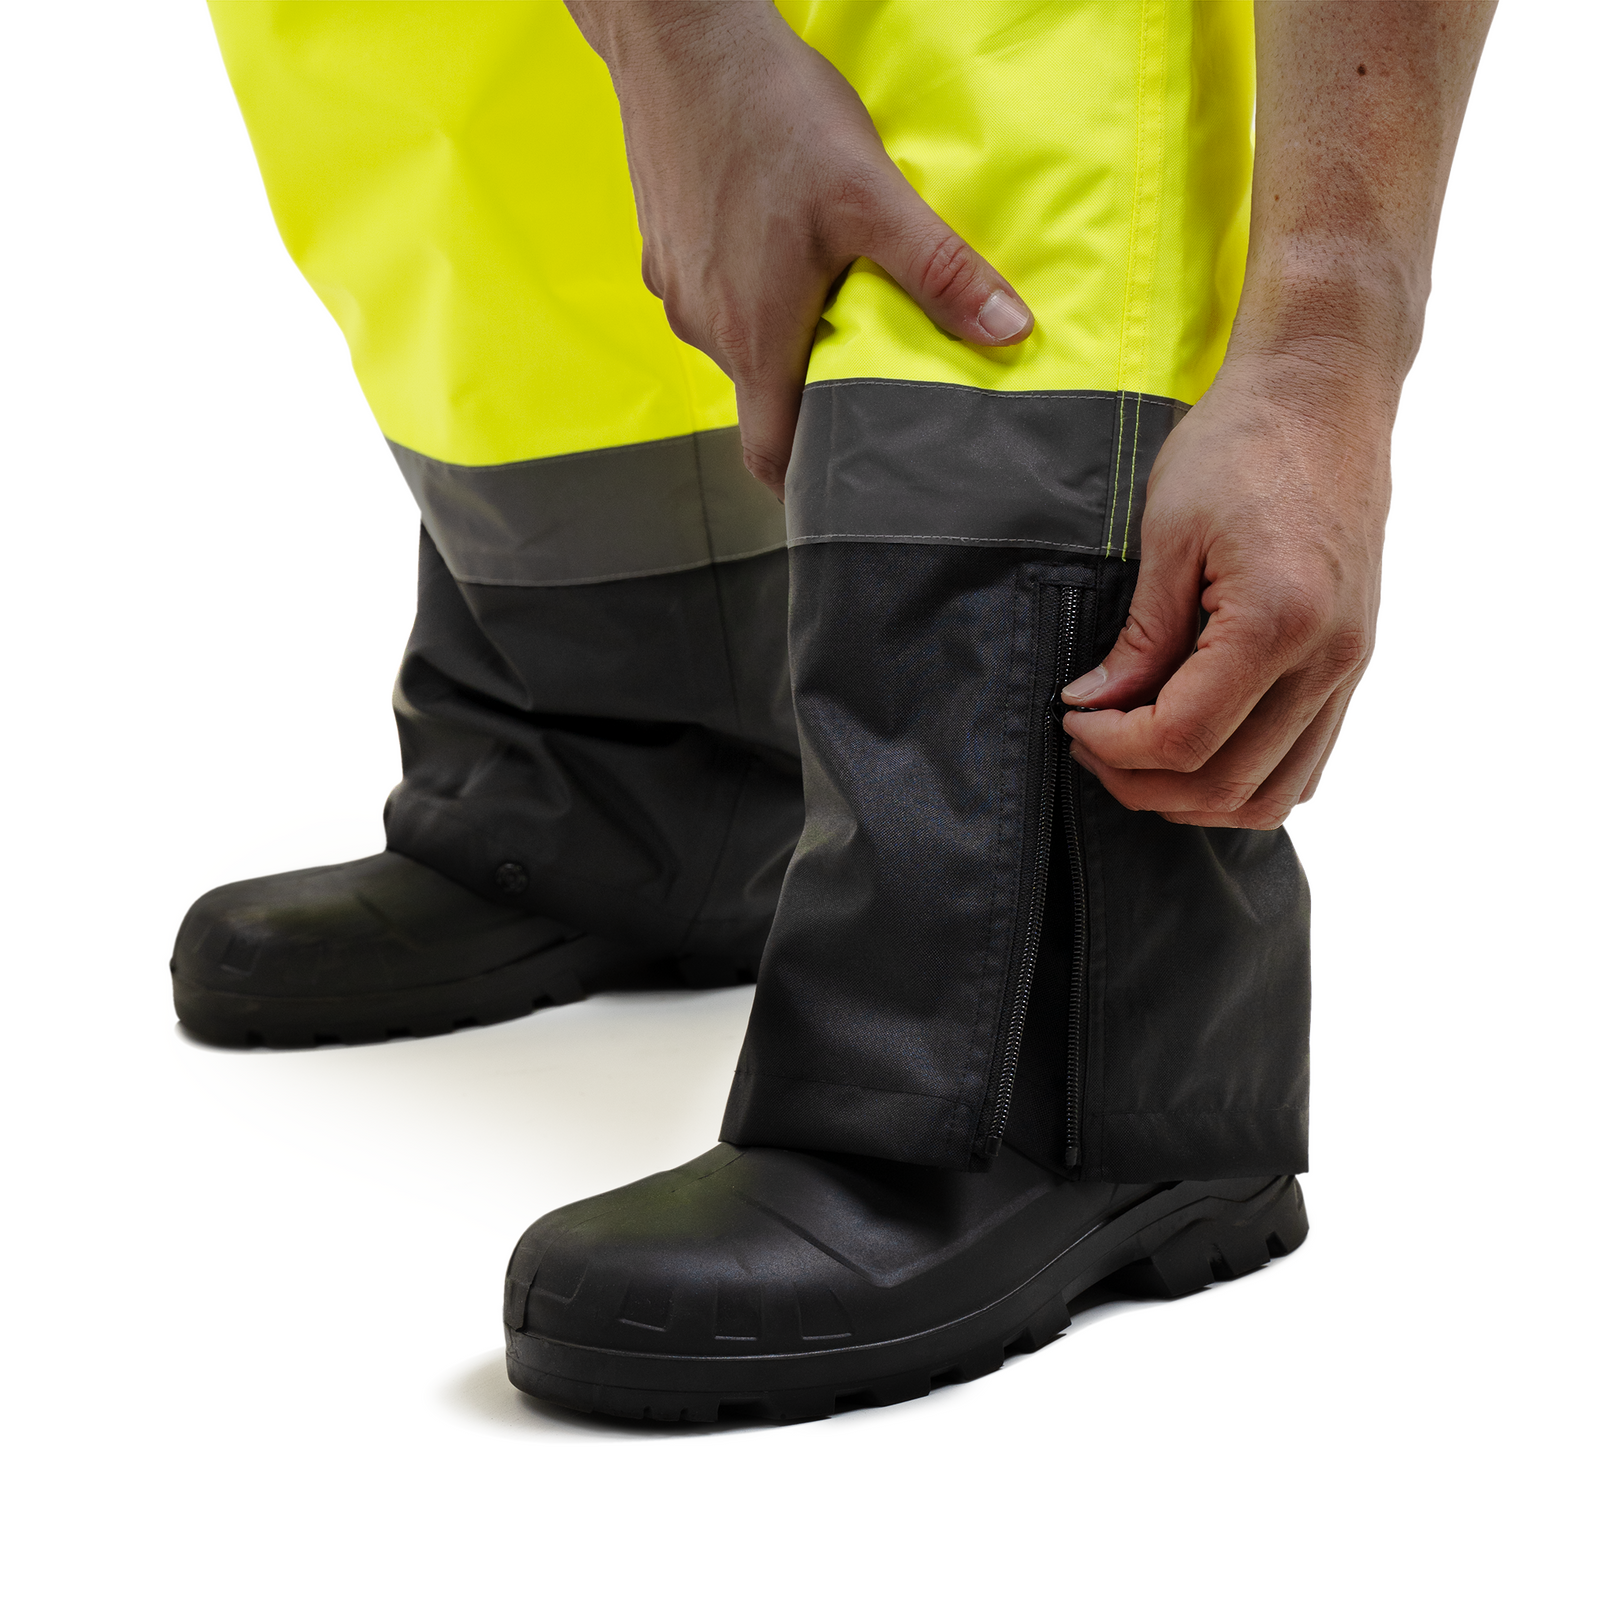 Close up of the boot zippered opening on the hi vis safety overall pants with reflective stripes